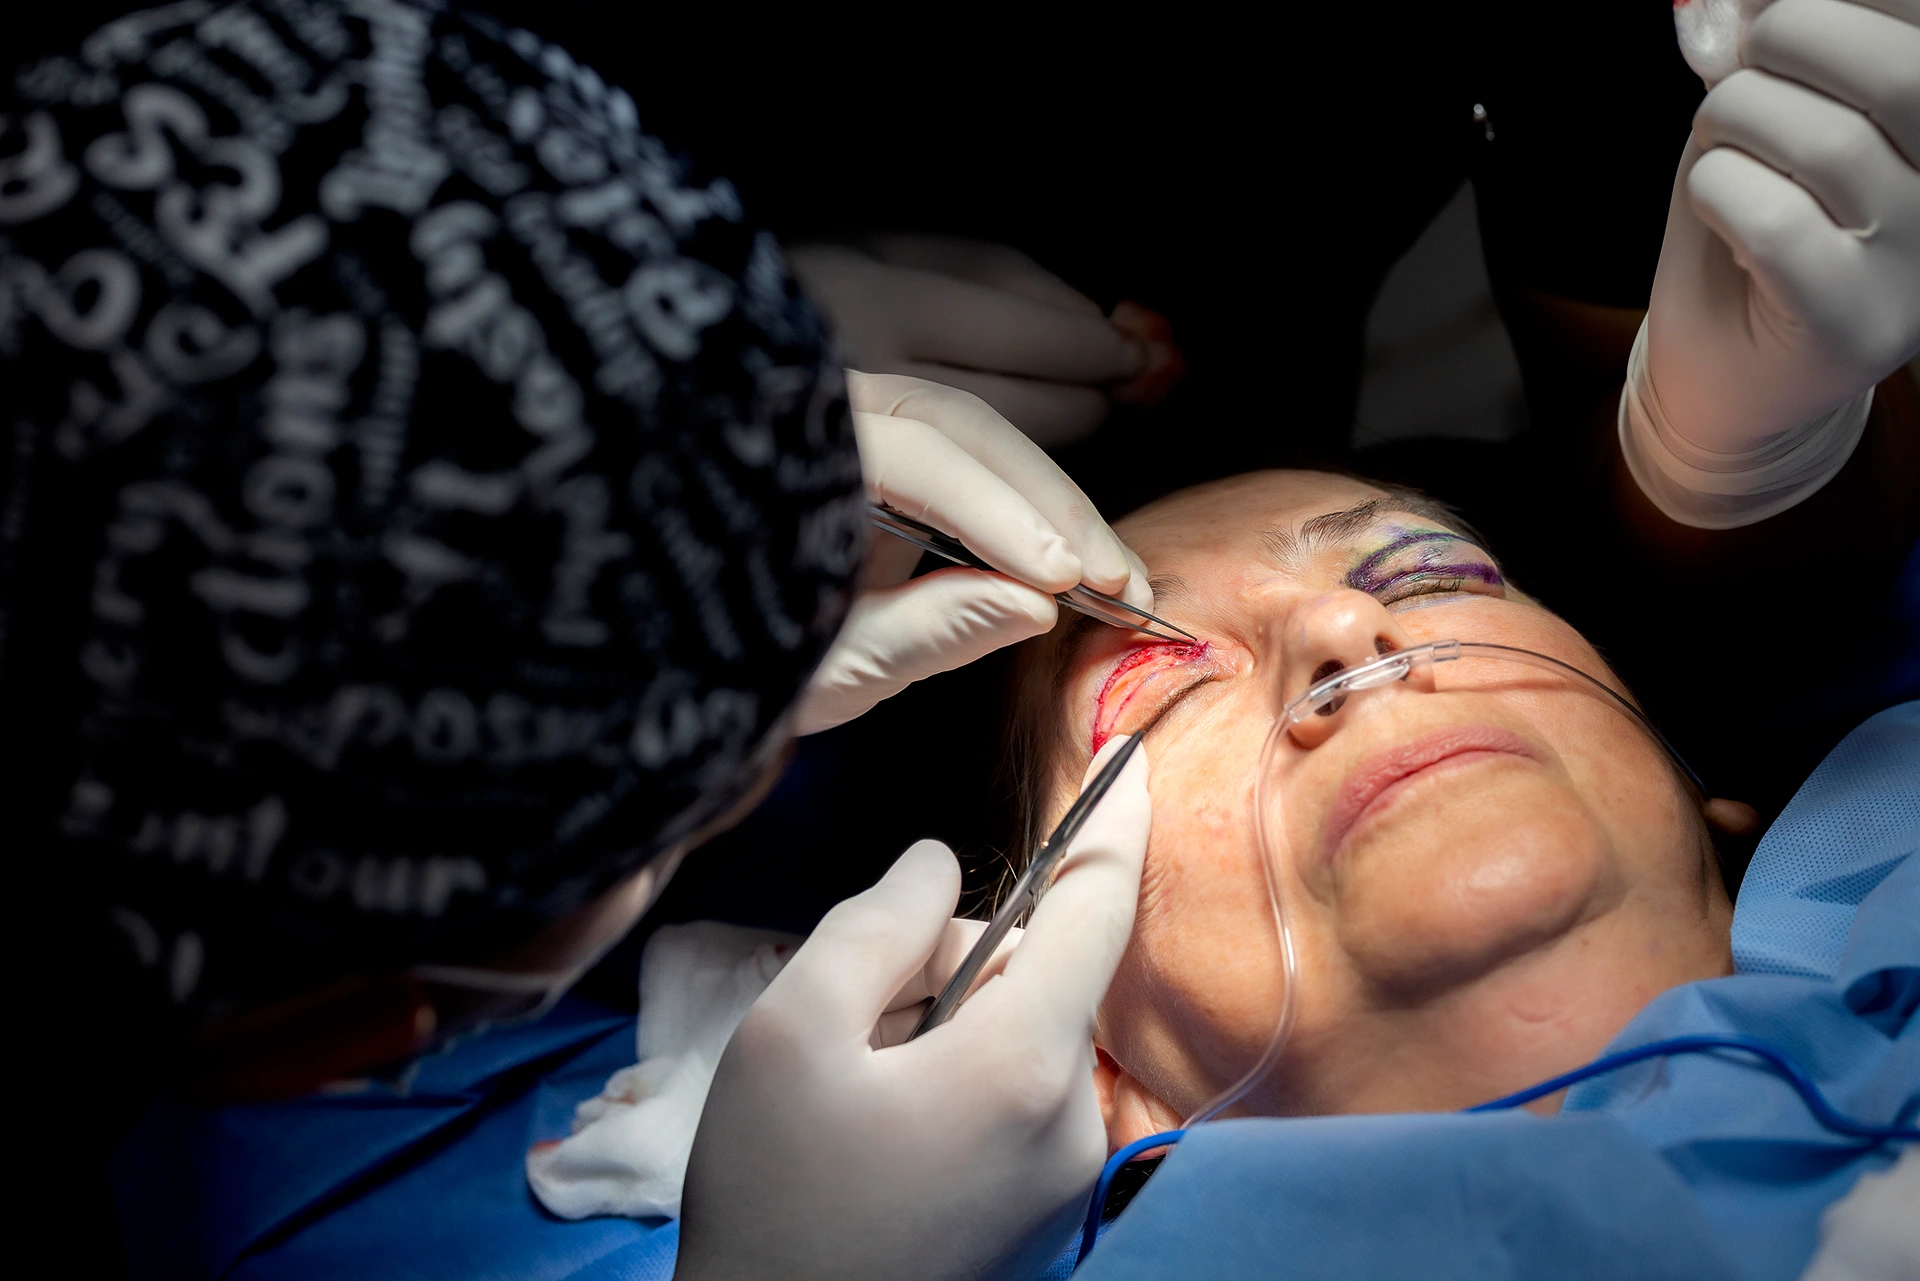 A person lying down with eyes closed undergoing a surgical procedure on their eyes, with medical personnel wearing gloves performing the operation. Tubes are attached to the patient’s nose for oxygen.